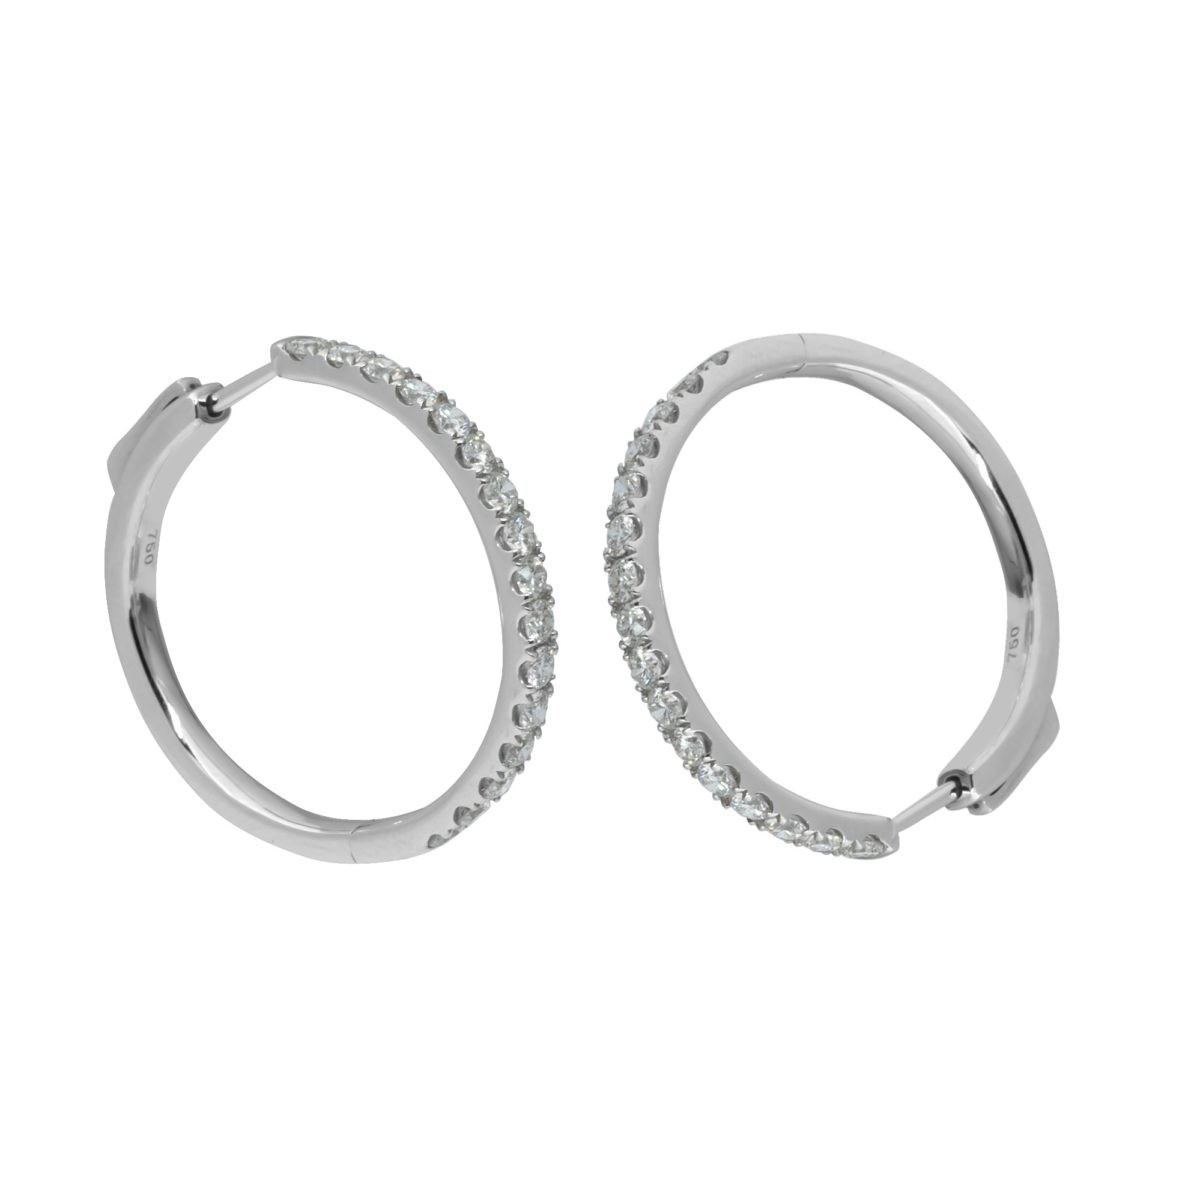 ne pair of 18ct white gold huggie earrings set with natural Diamonds